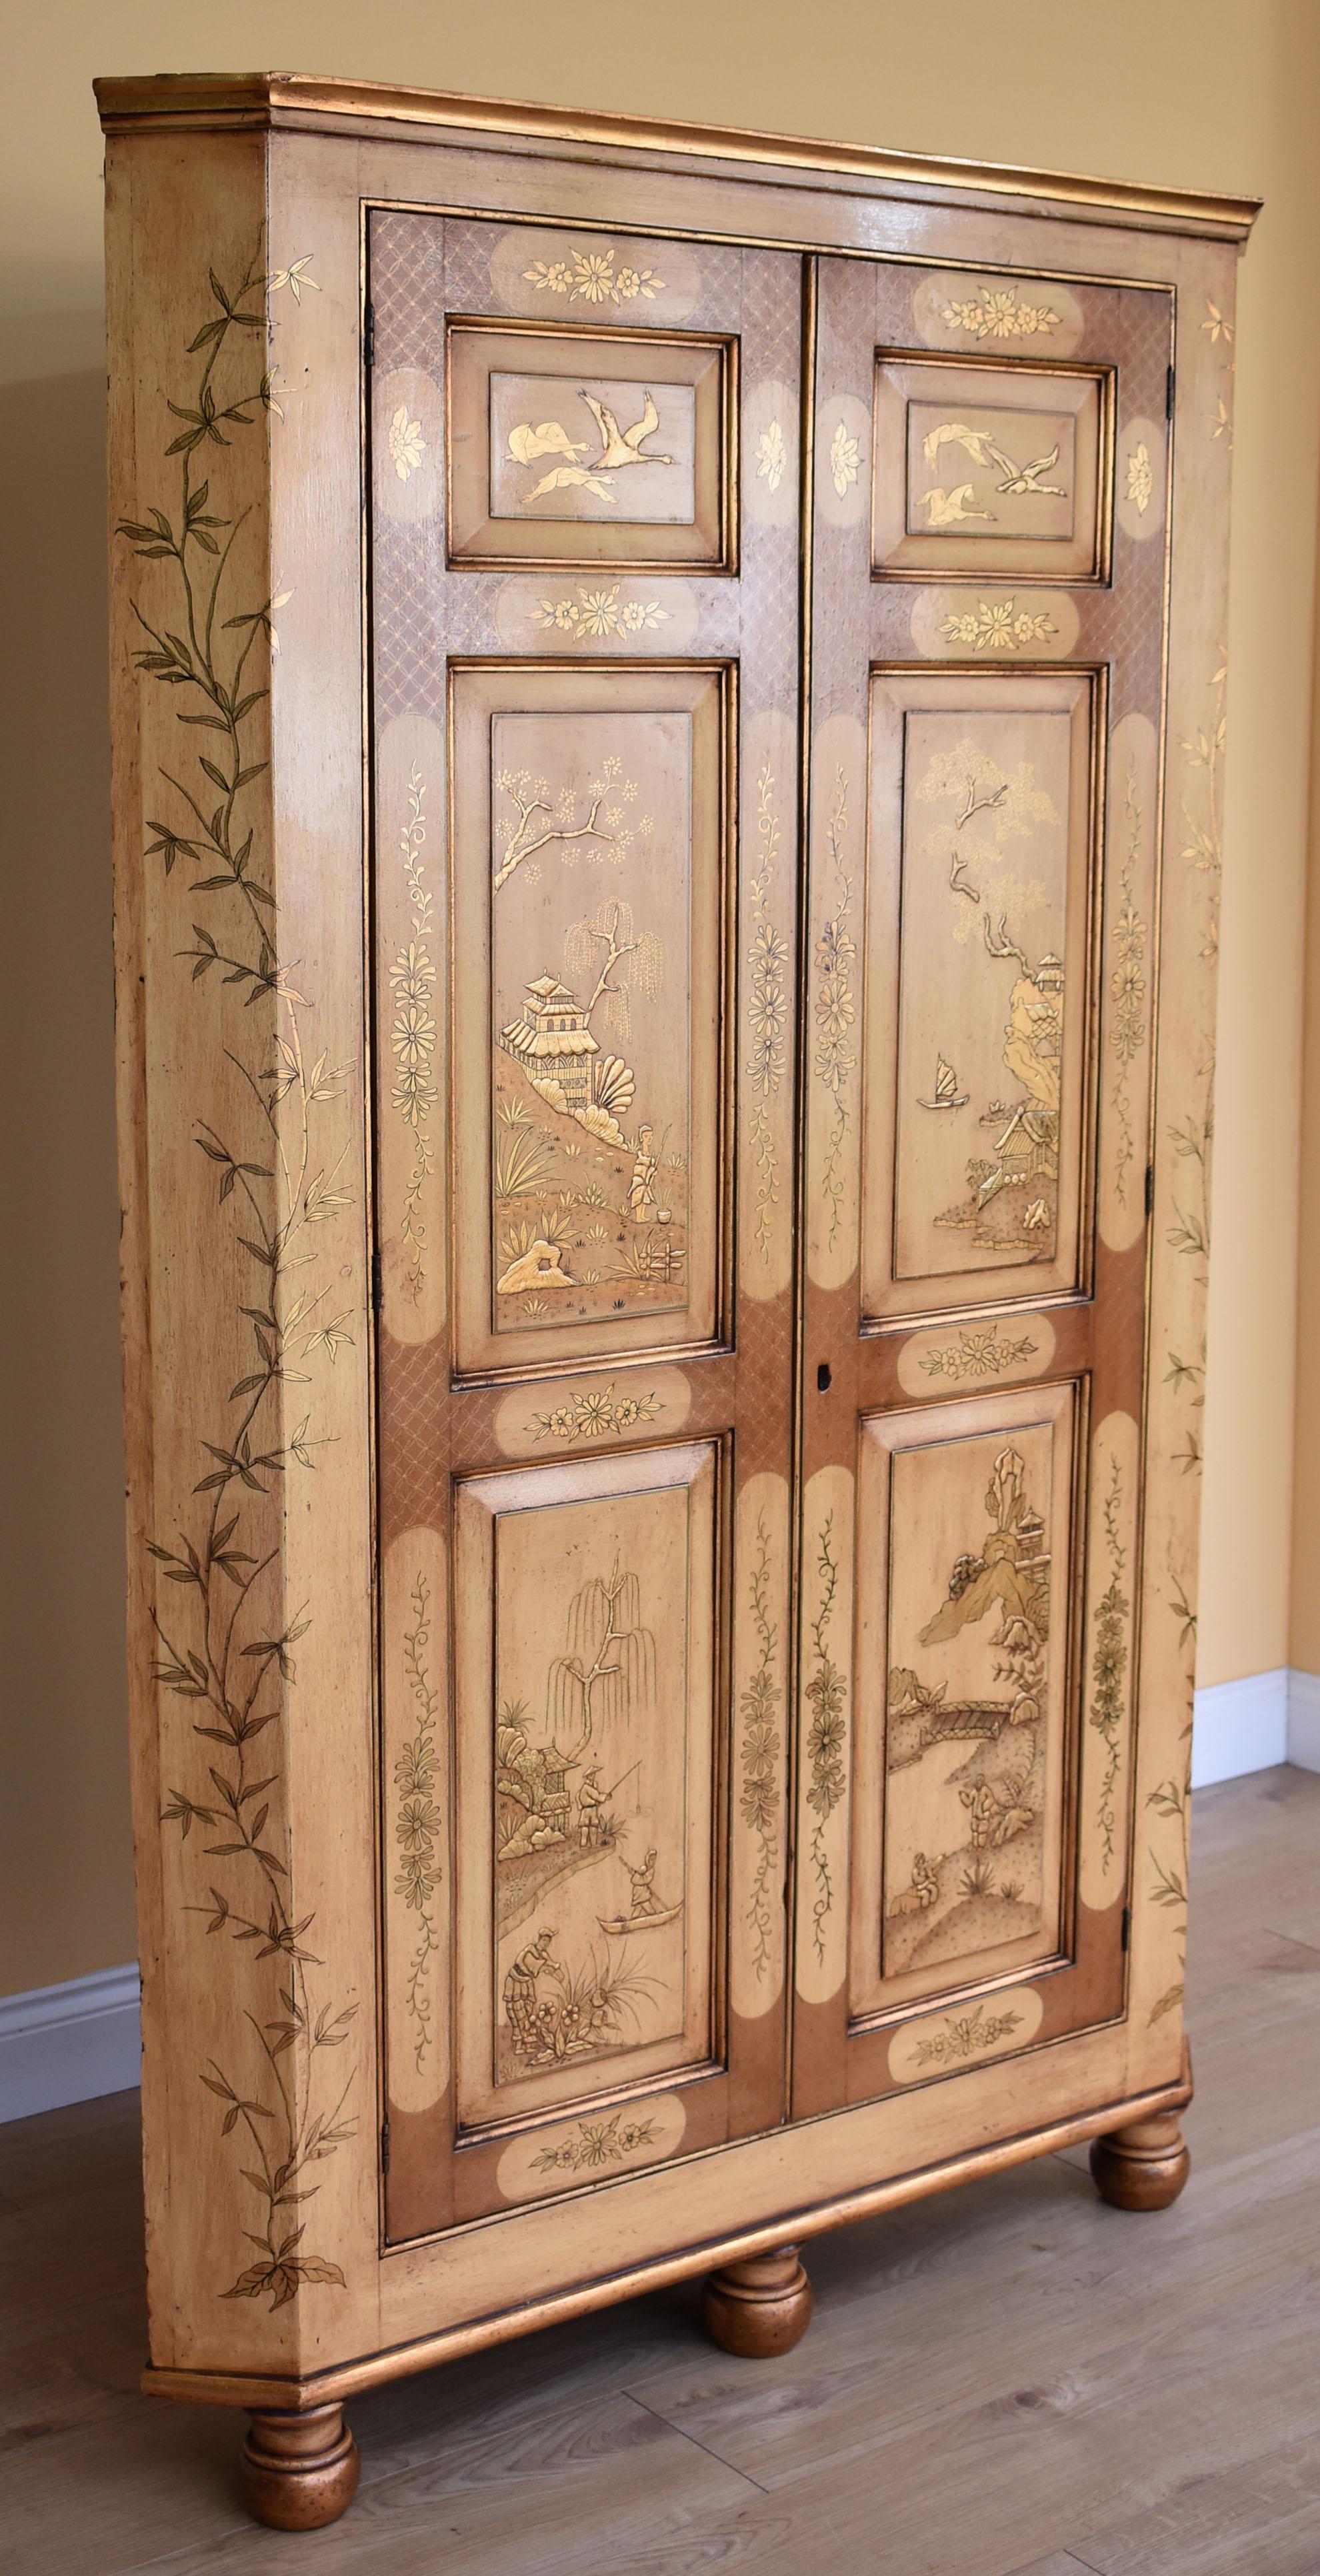 For sale is a good quality George III mahogany, and later chinoiserie, corner cupboard. The front of the cupboard has two doors, each with three panels. Every panel is ornately decorated with chinoiserie, depicting oriental scenes. The cupboard